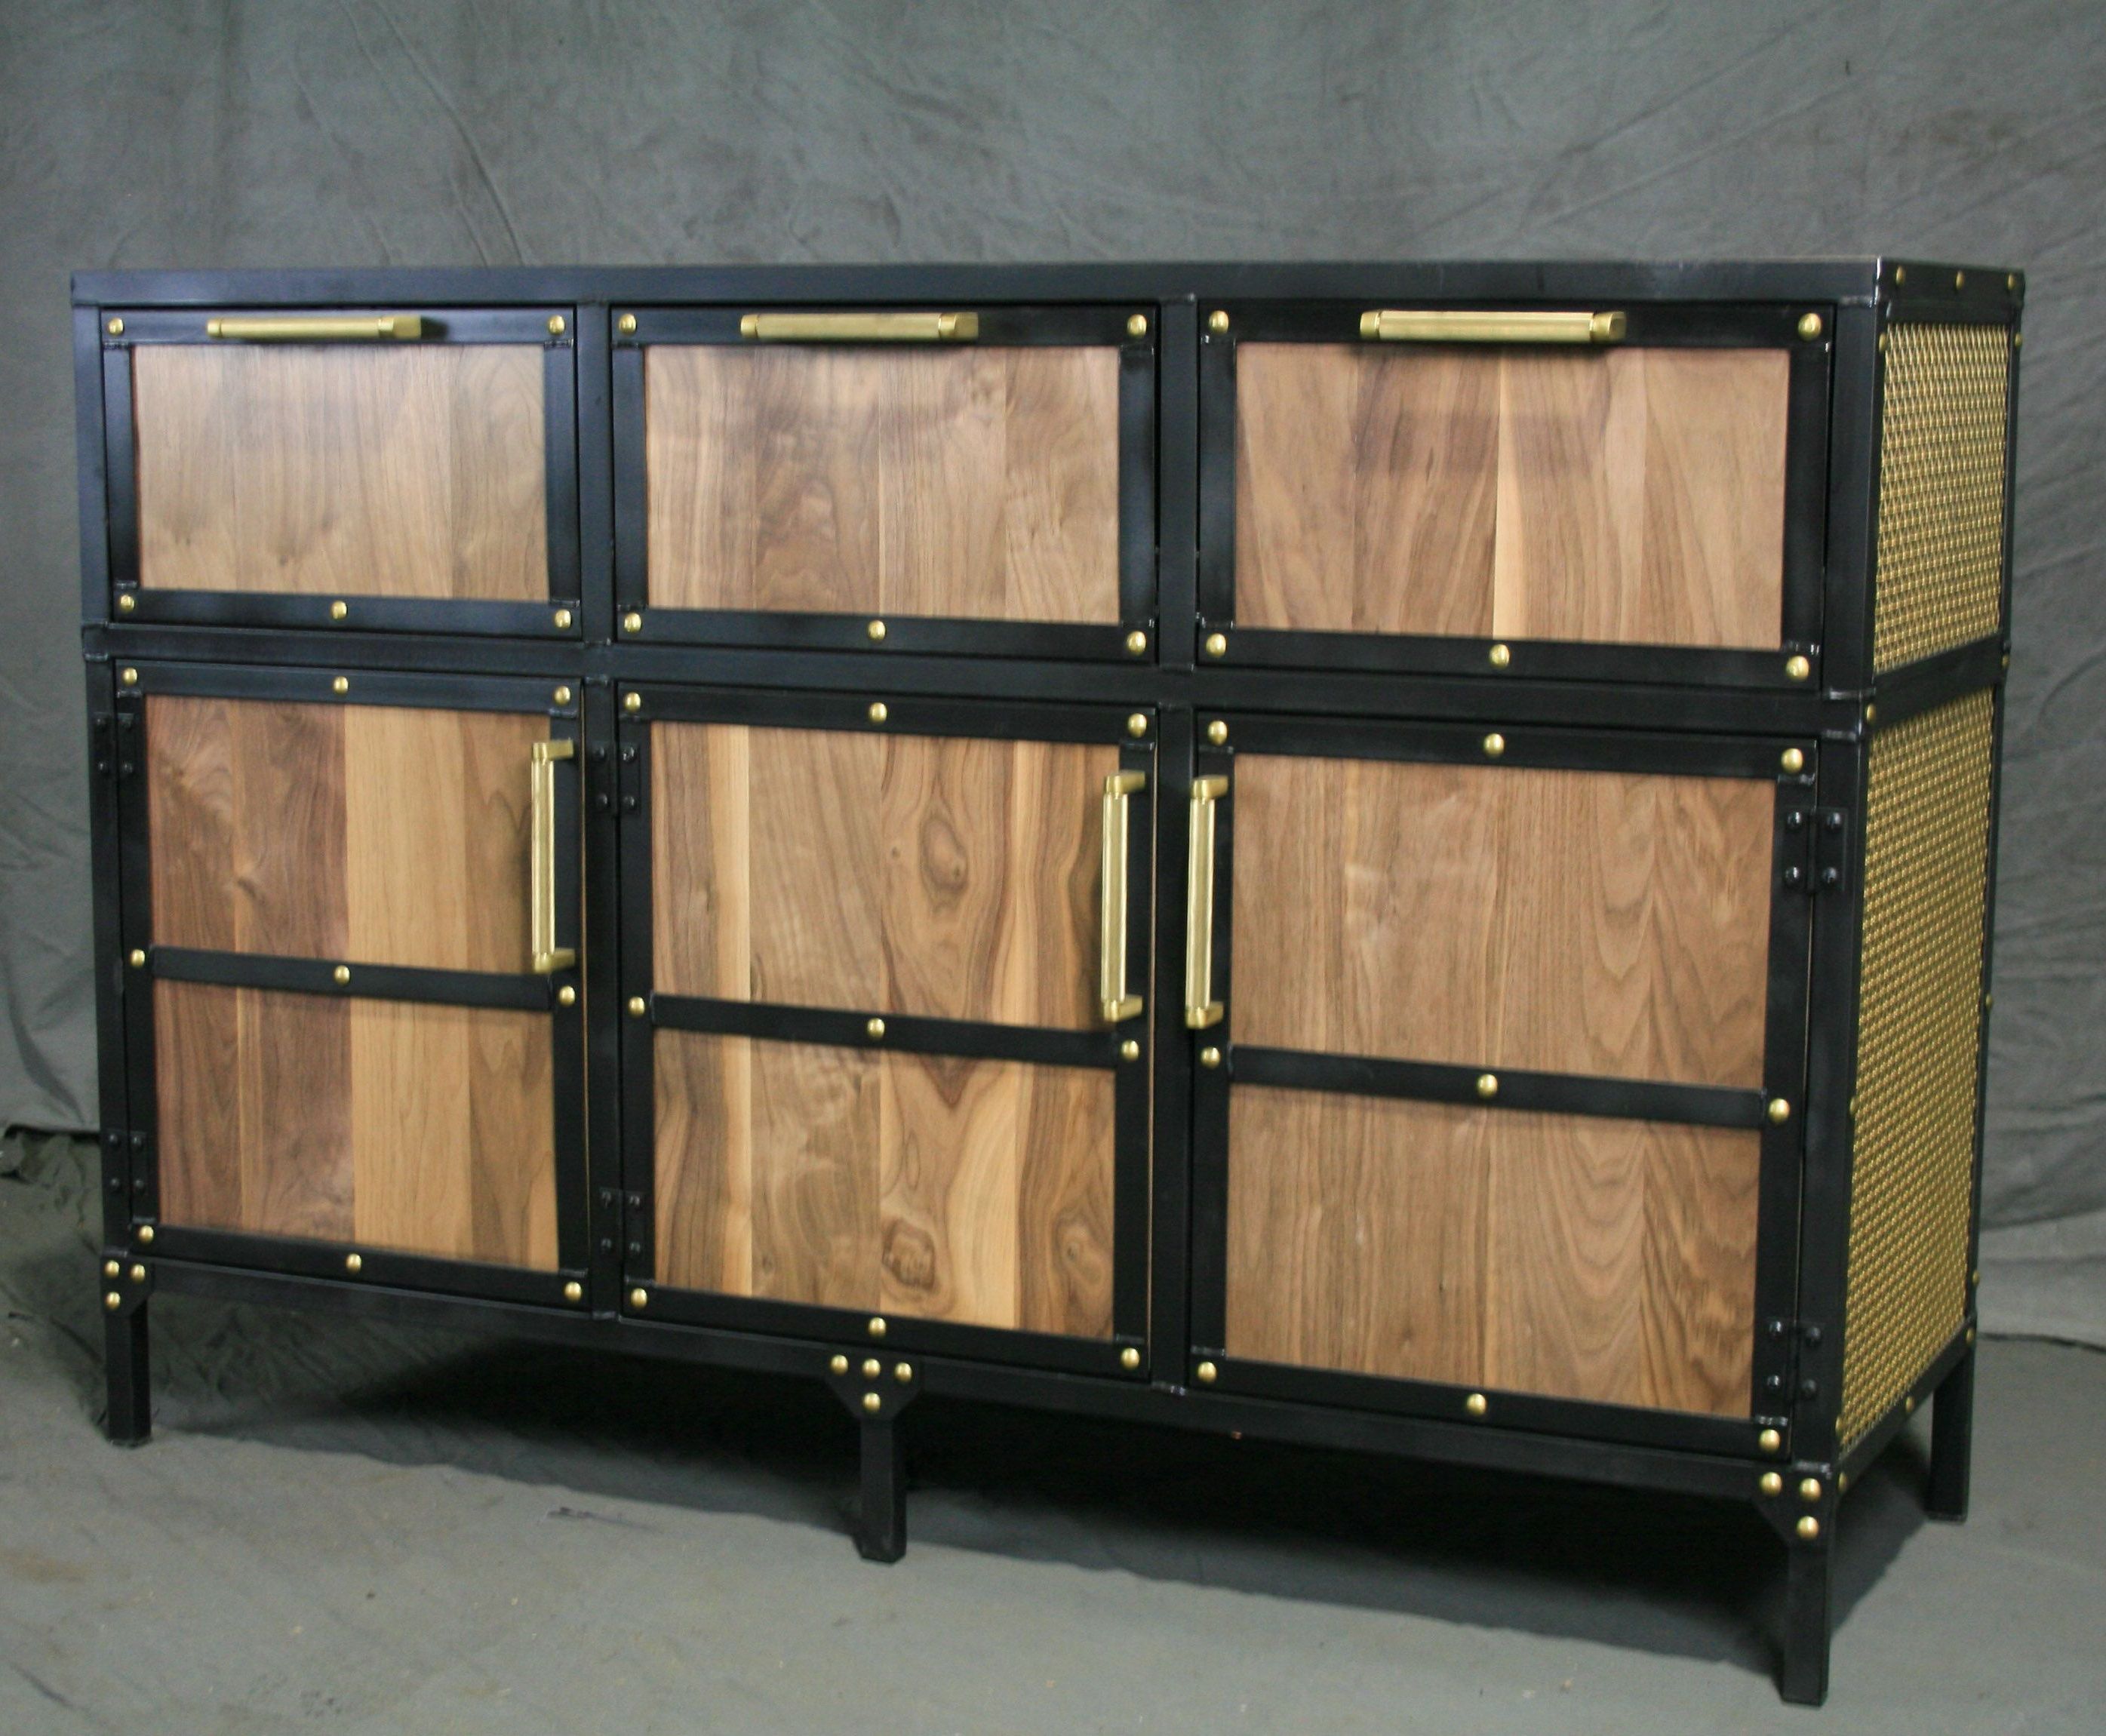 Buy A Handmade Industrial Sideboard With Brass Accents Pertaining To Industrial Concrete Like Buffets (View 14 of 20)